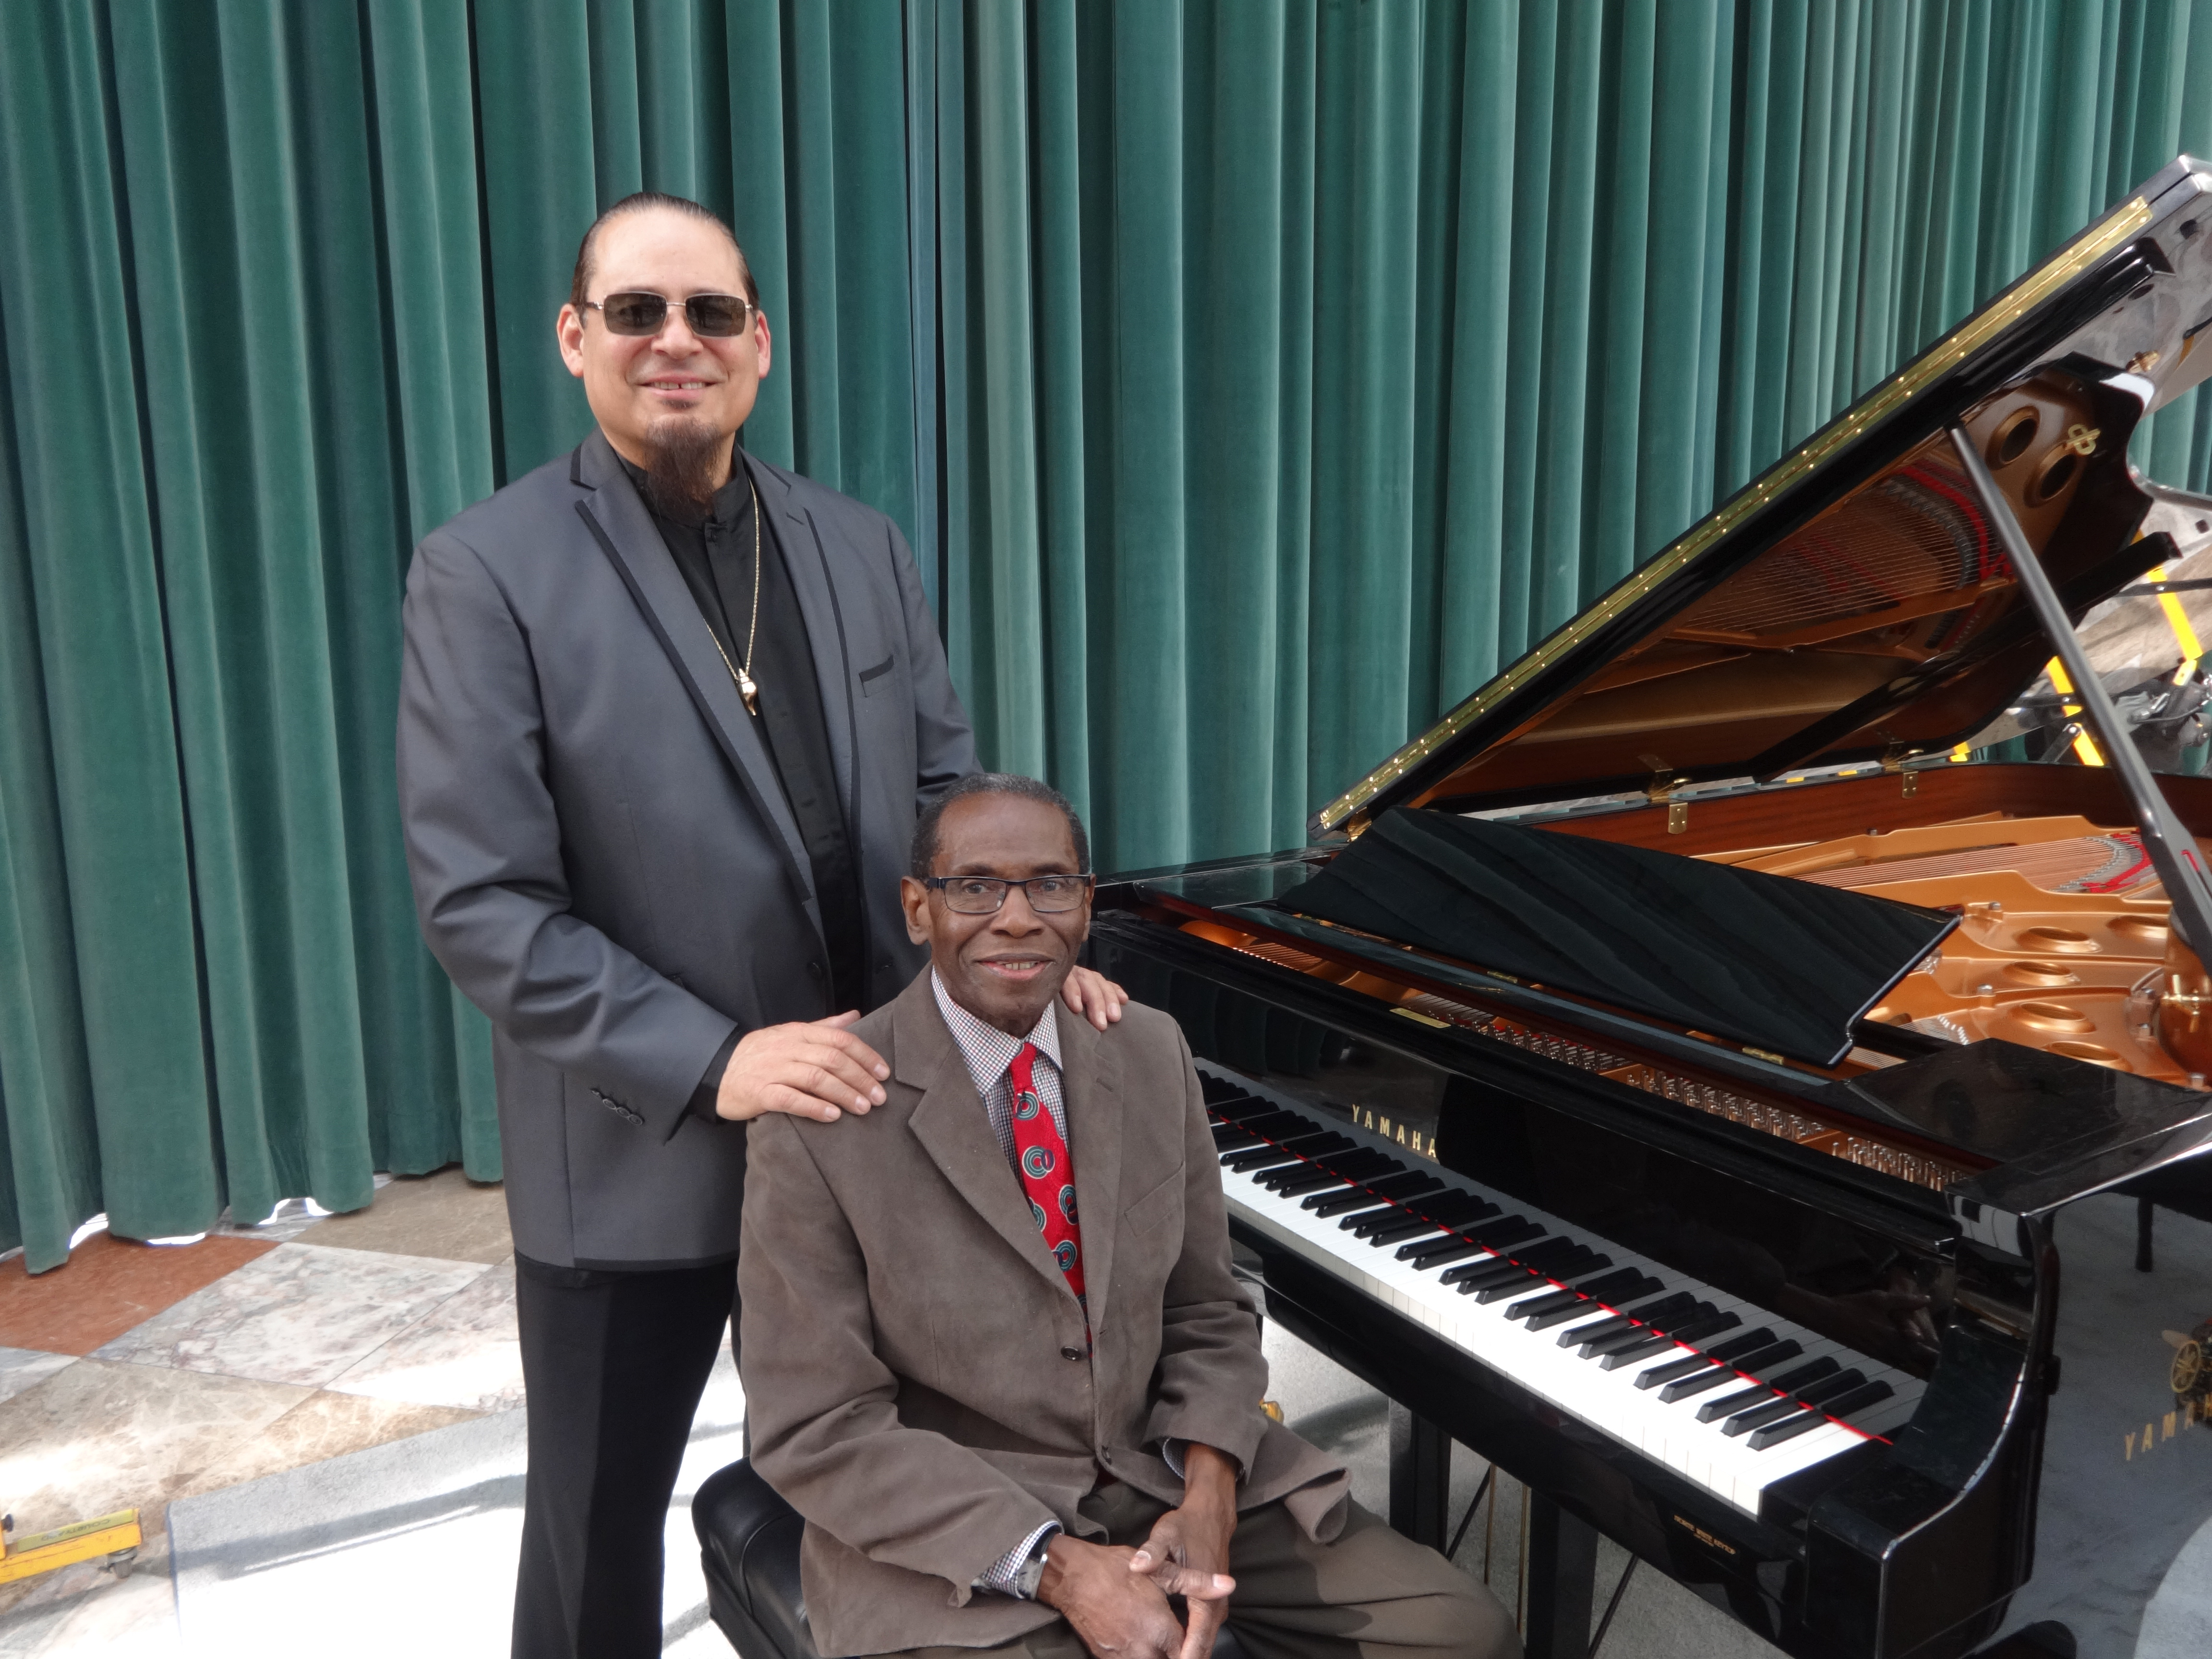 George Cables and Steve Turre